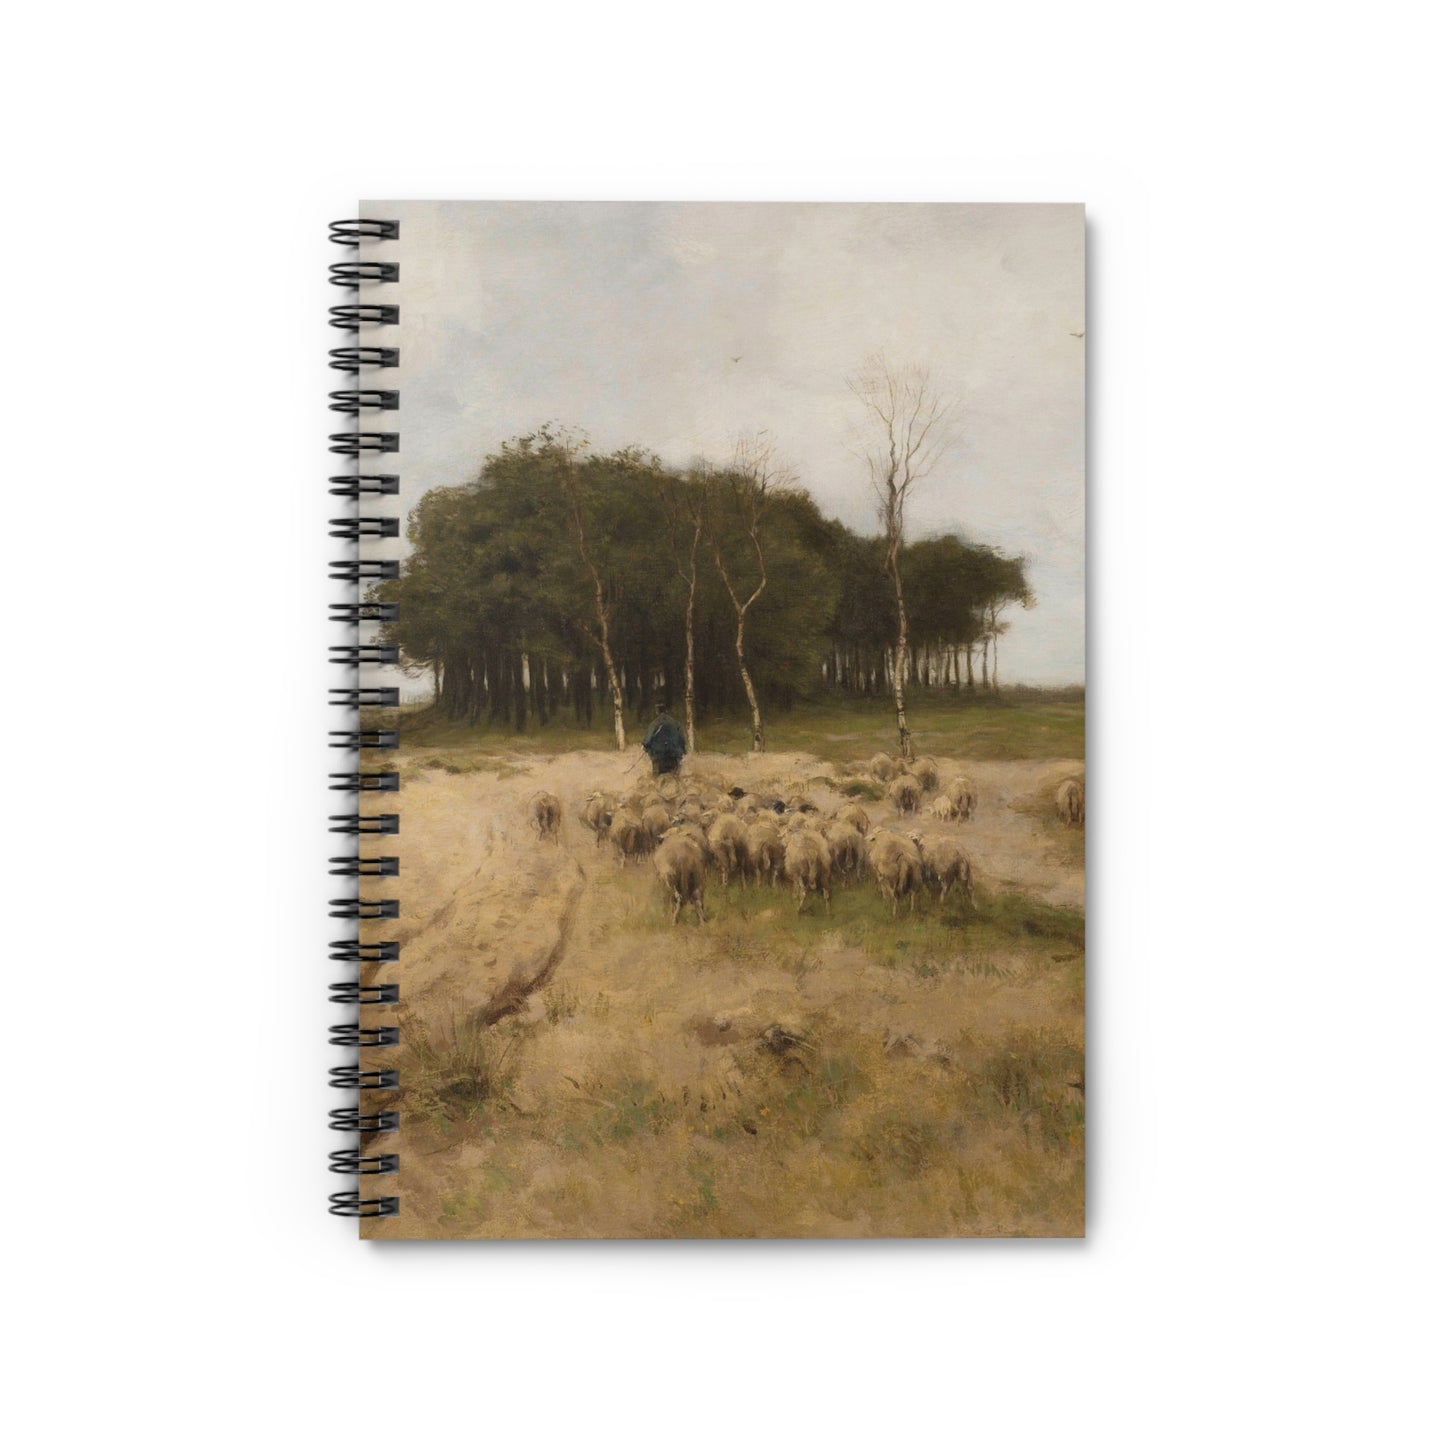 Shepherd With Flock Notebook - Ruled Line